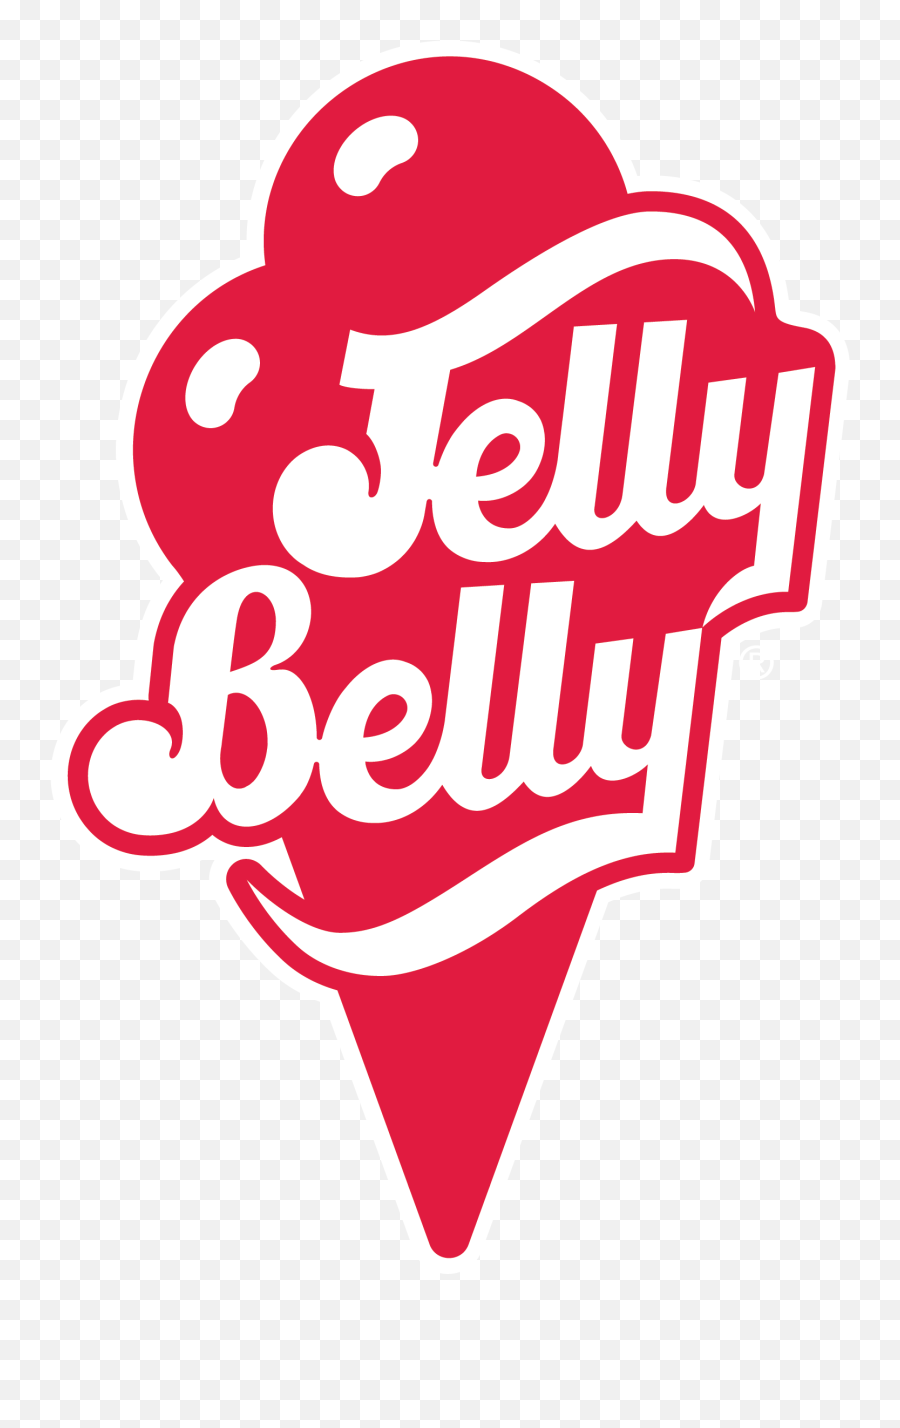 Jelly Belly Ice Cream Logo - Jelly Belly Ice Cream Logo Png,Jelly Belly Logo